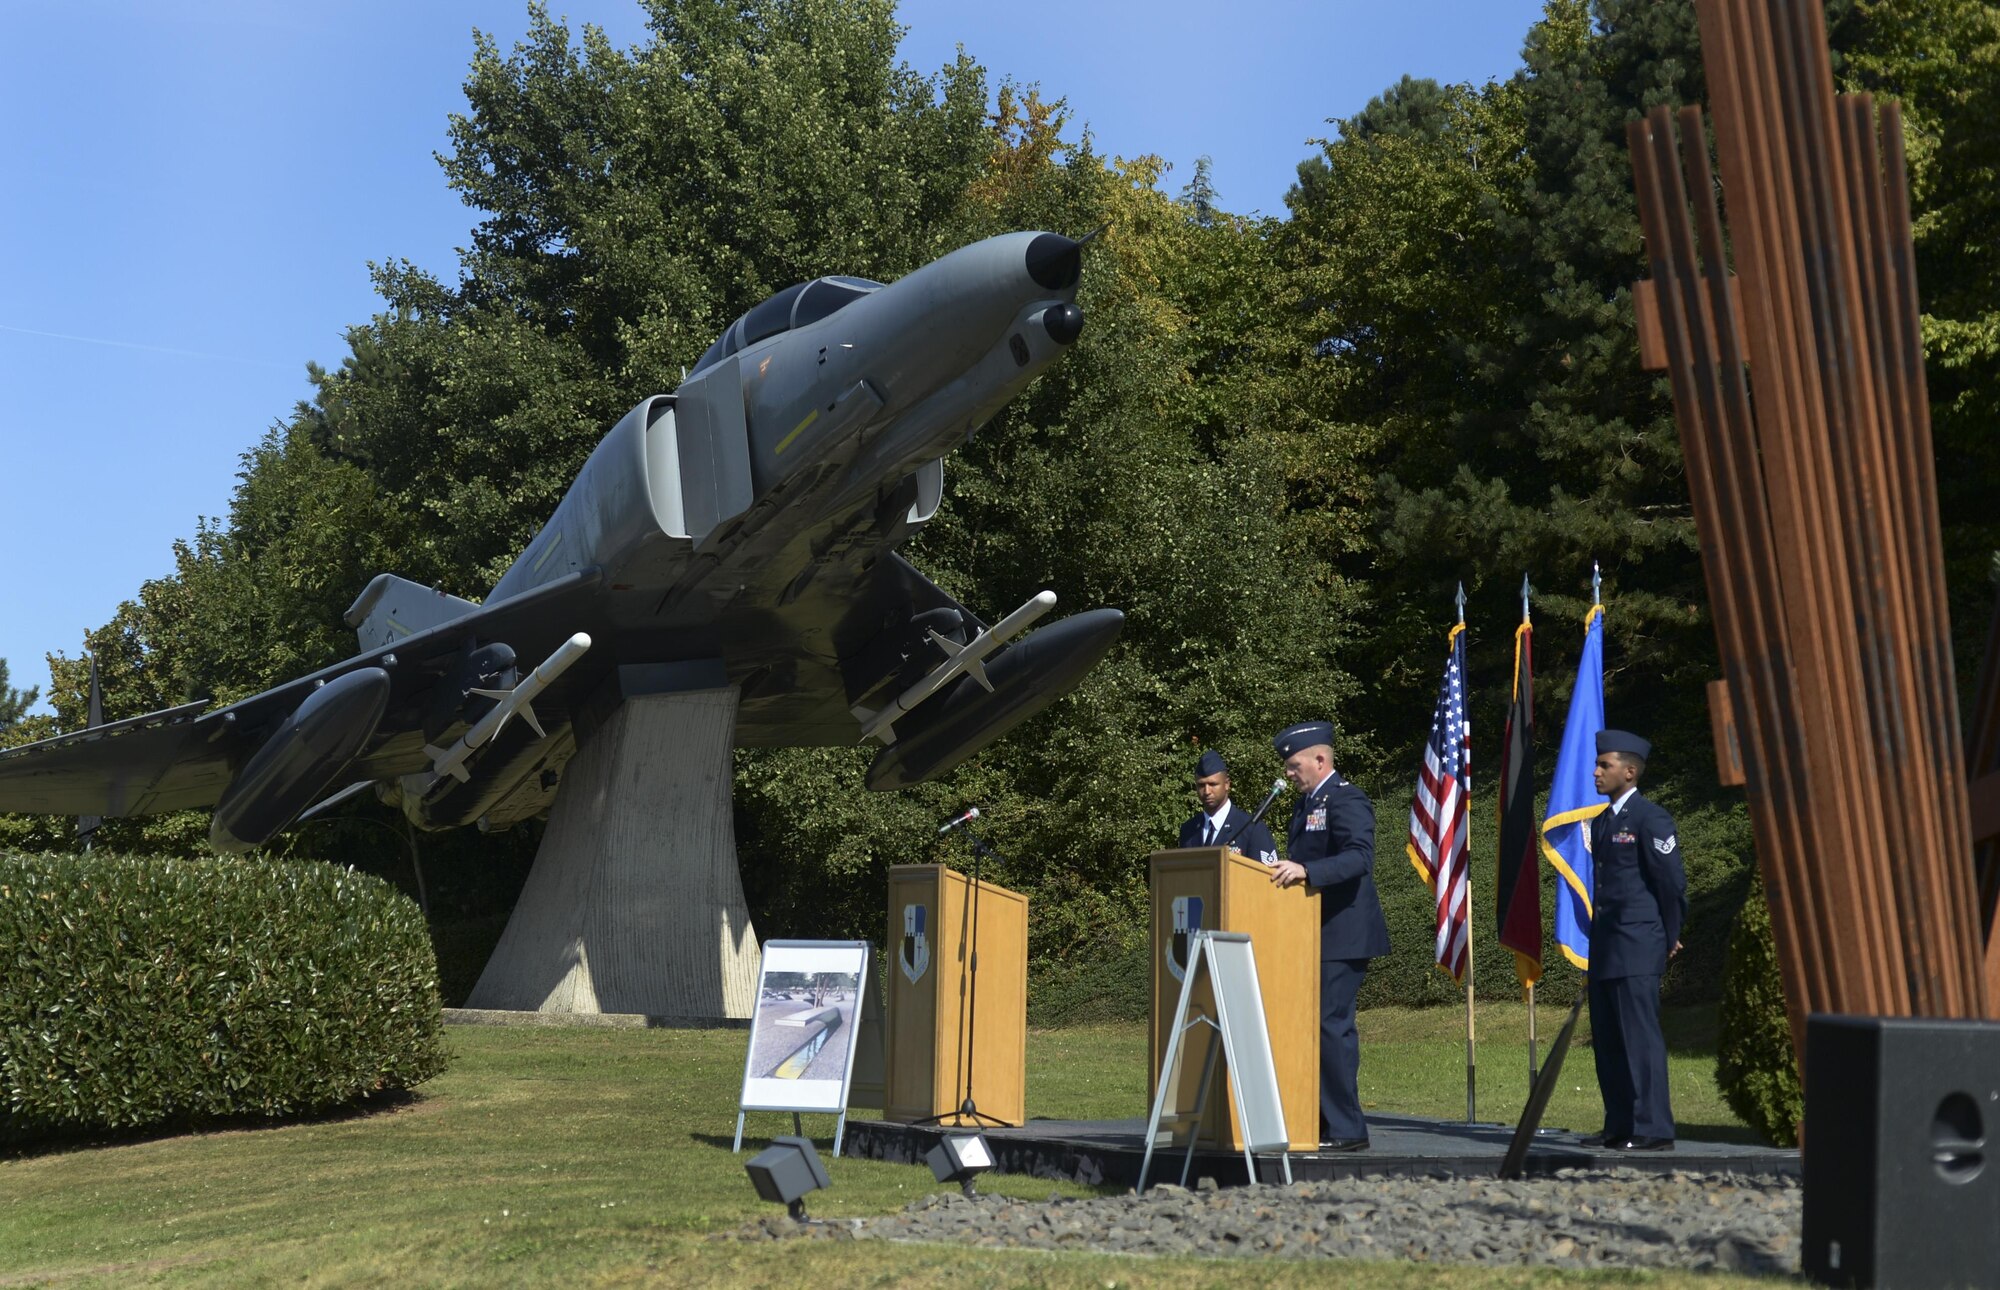 Col. Joe McFall, 52nd Fighter Wing commander, recites a first-person narrative of the events of Sept. 11, 2001 during a memorial service at Spangdahlem Air Base, Germany, Sept. 9, 2016. Airmen throughout the Air Force held memorial ceremonies honor the victims, lost service members and emergency response teams as part of the 15th anniversary of the attacks. (U.S. Air Force photo/Senior Airman Dawn M. Weber)